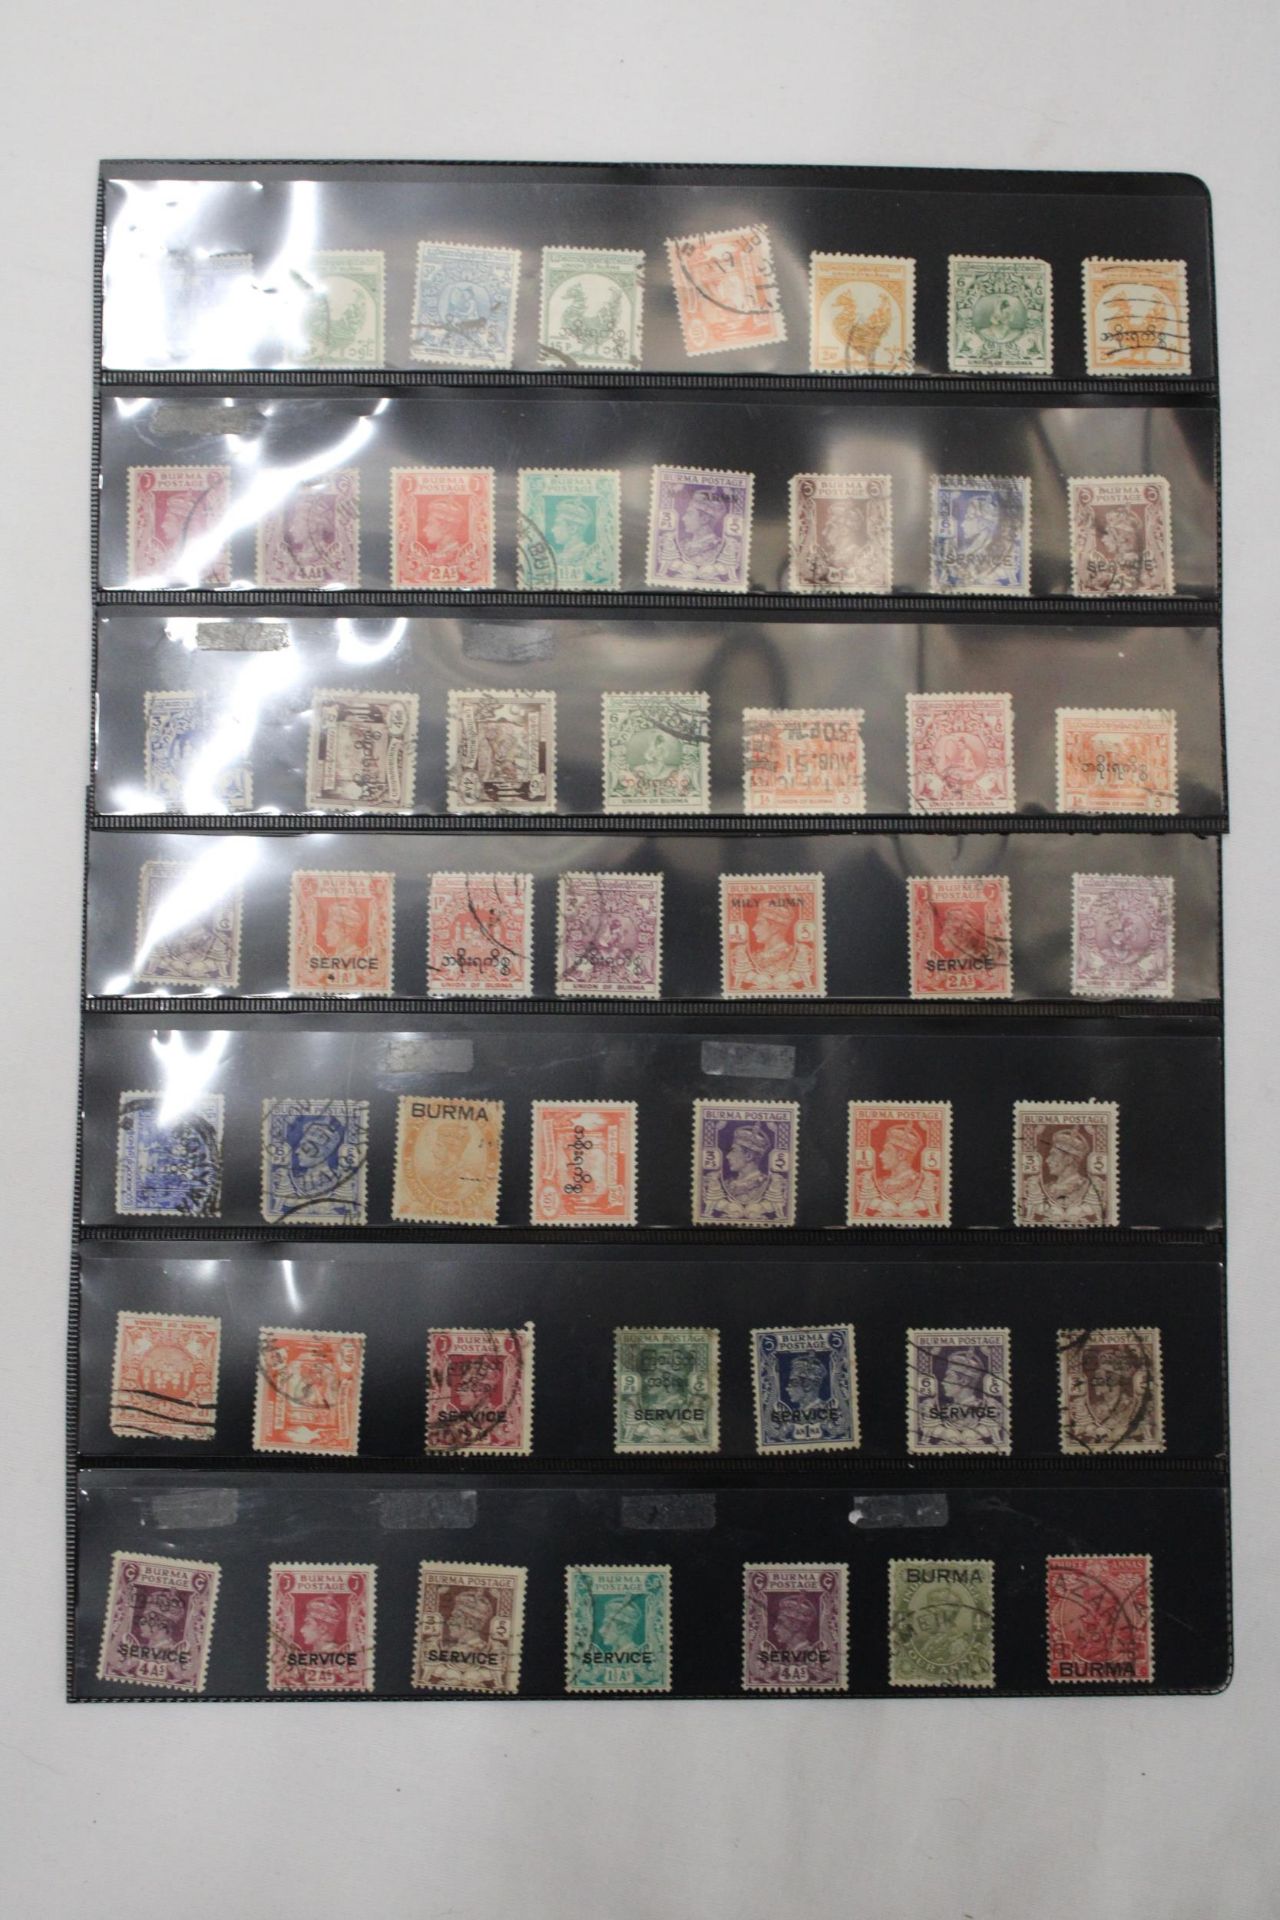 TWO PAGES OF STAMPS FROM BURMA GEORGE 6TH